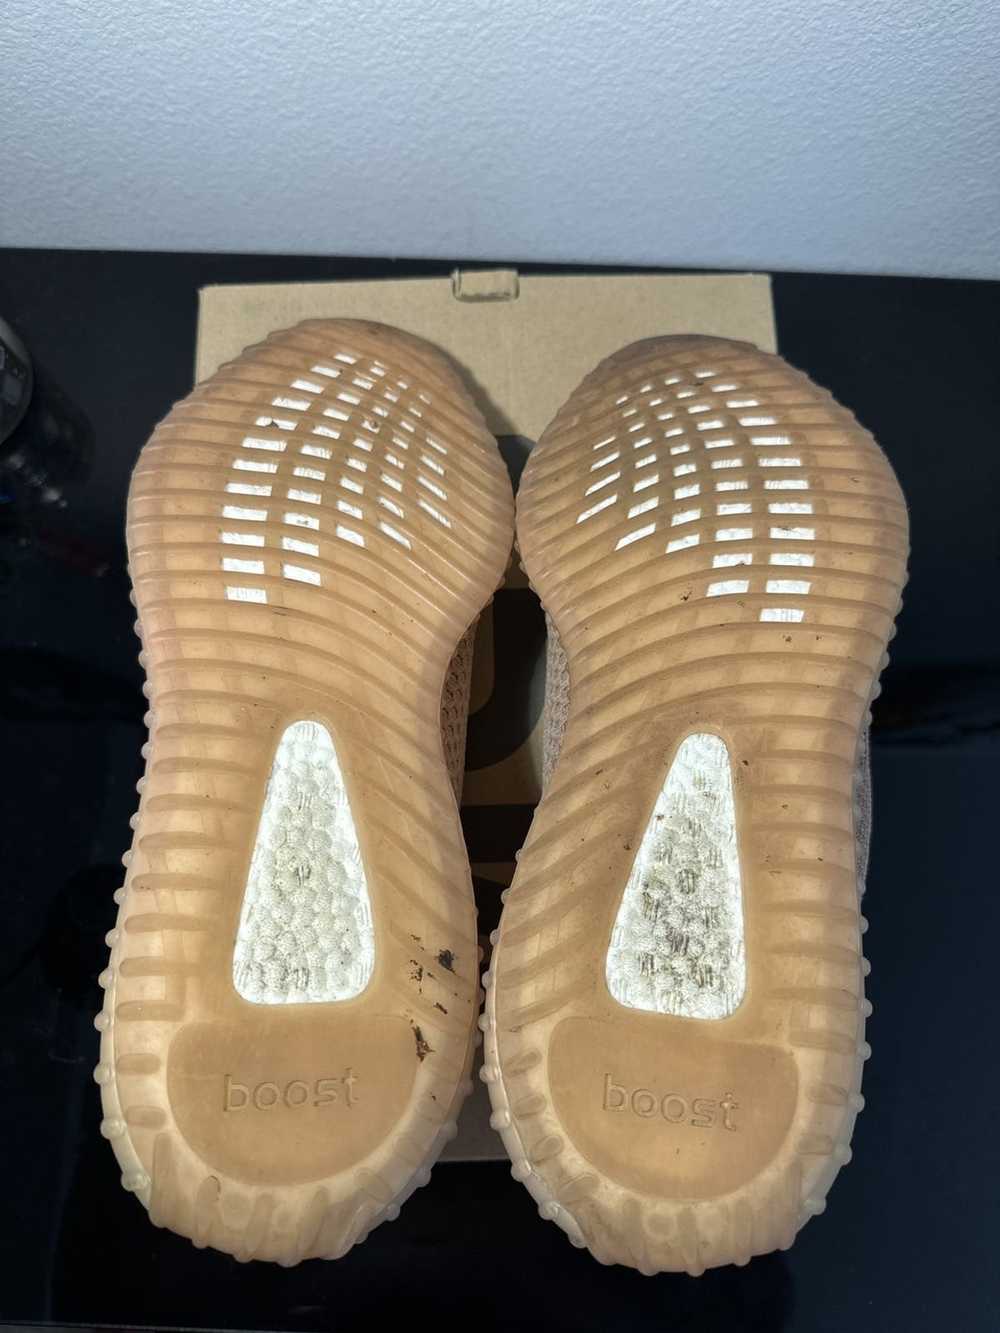 Adidas Yeezy boost 350 clay size 13 - image 7